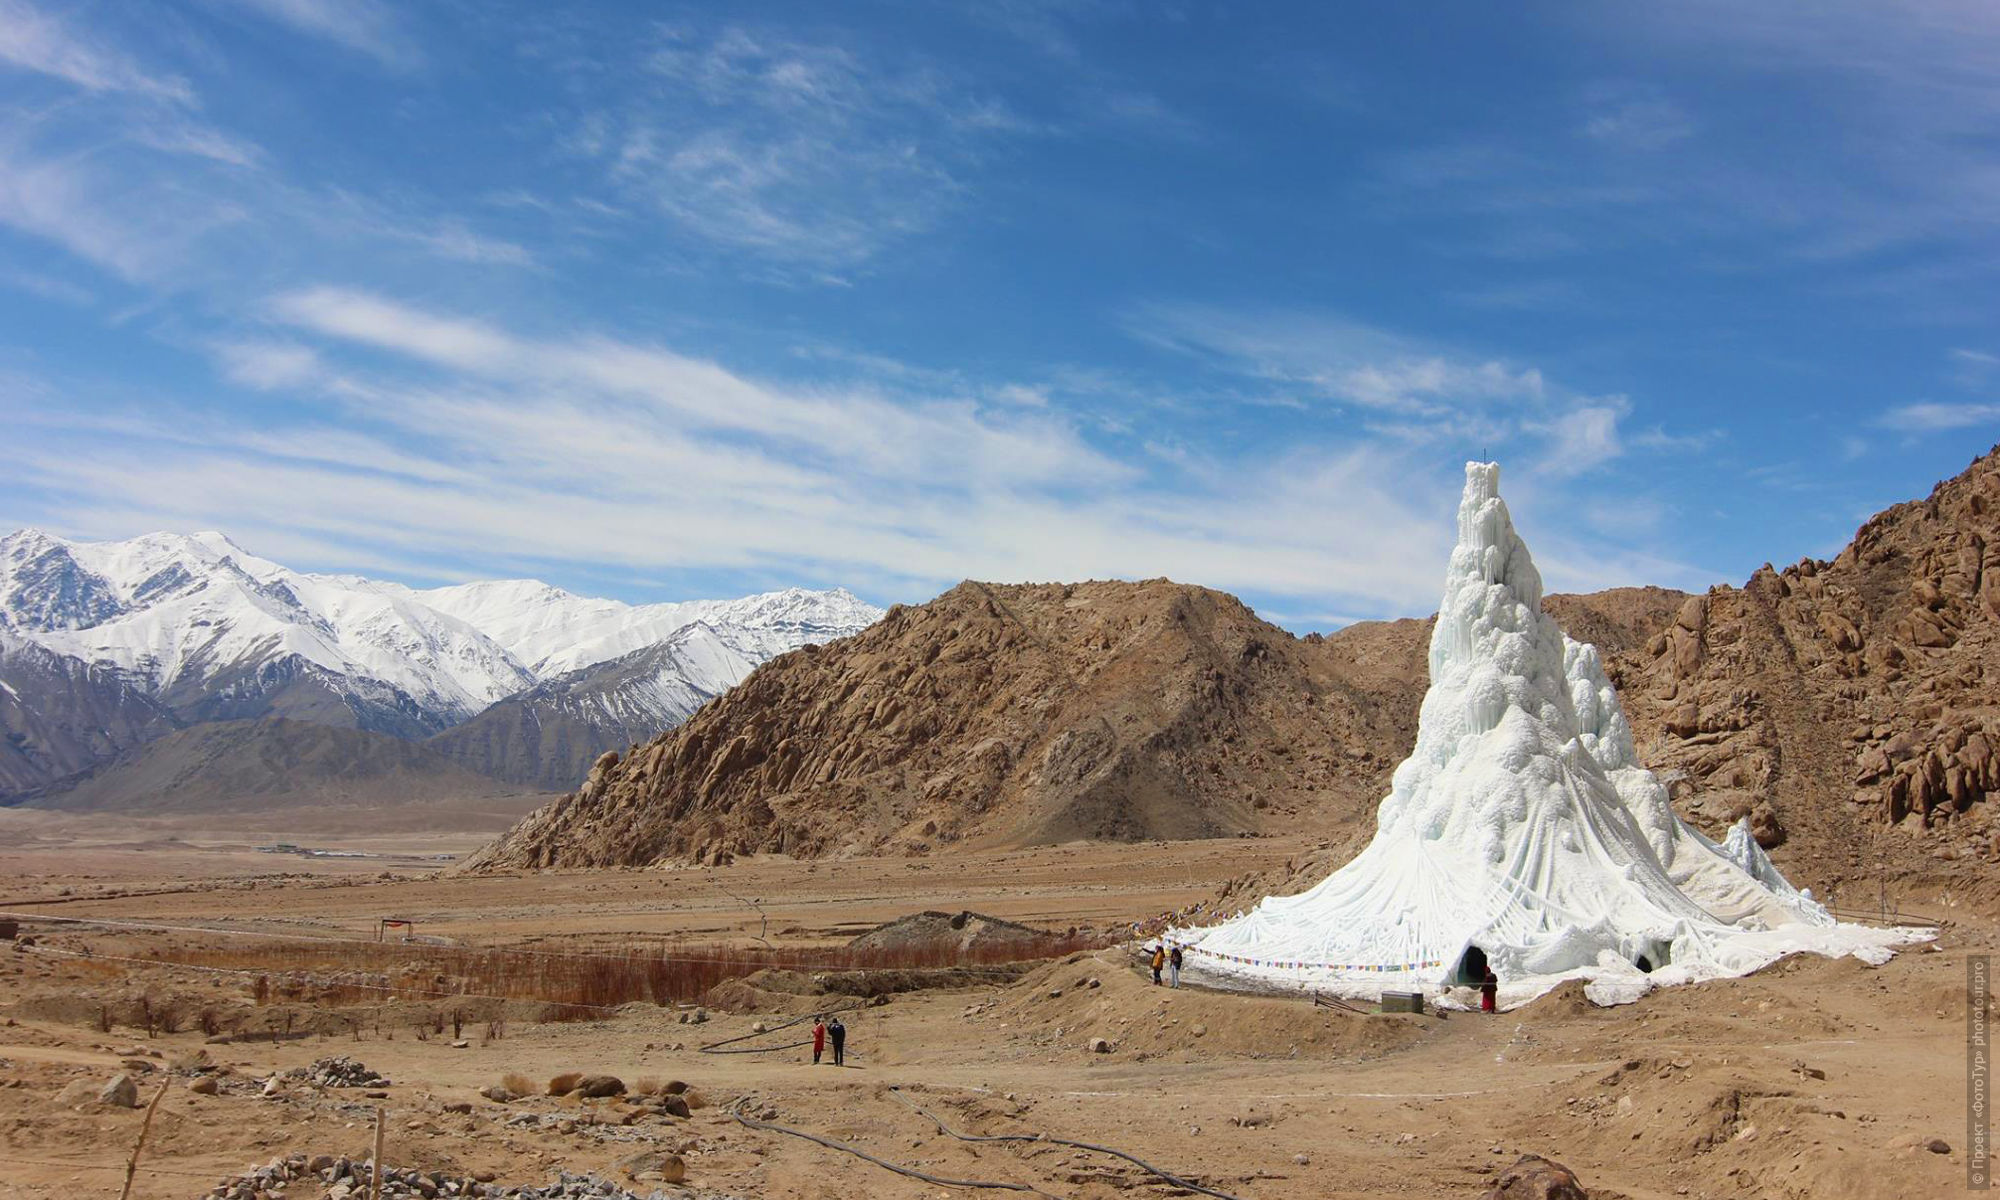 Ice stupa in the vicinity of the village of Pyang. Photo tour to Tibet for the Winter Mysteries in Ladakh, Stok and Matho monasteries, 01.03. - 03/10/2020